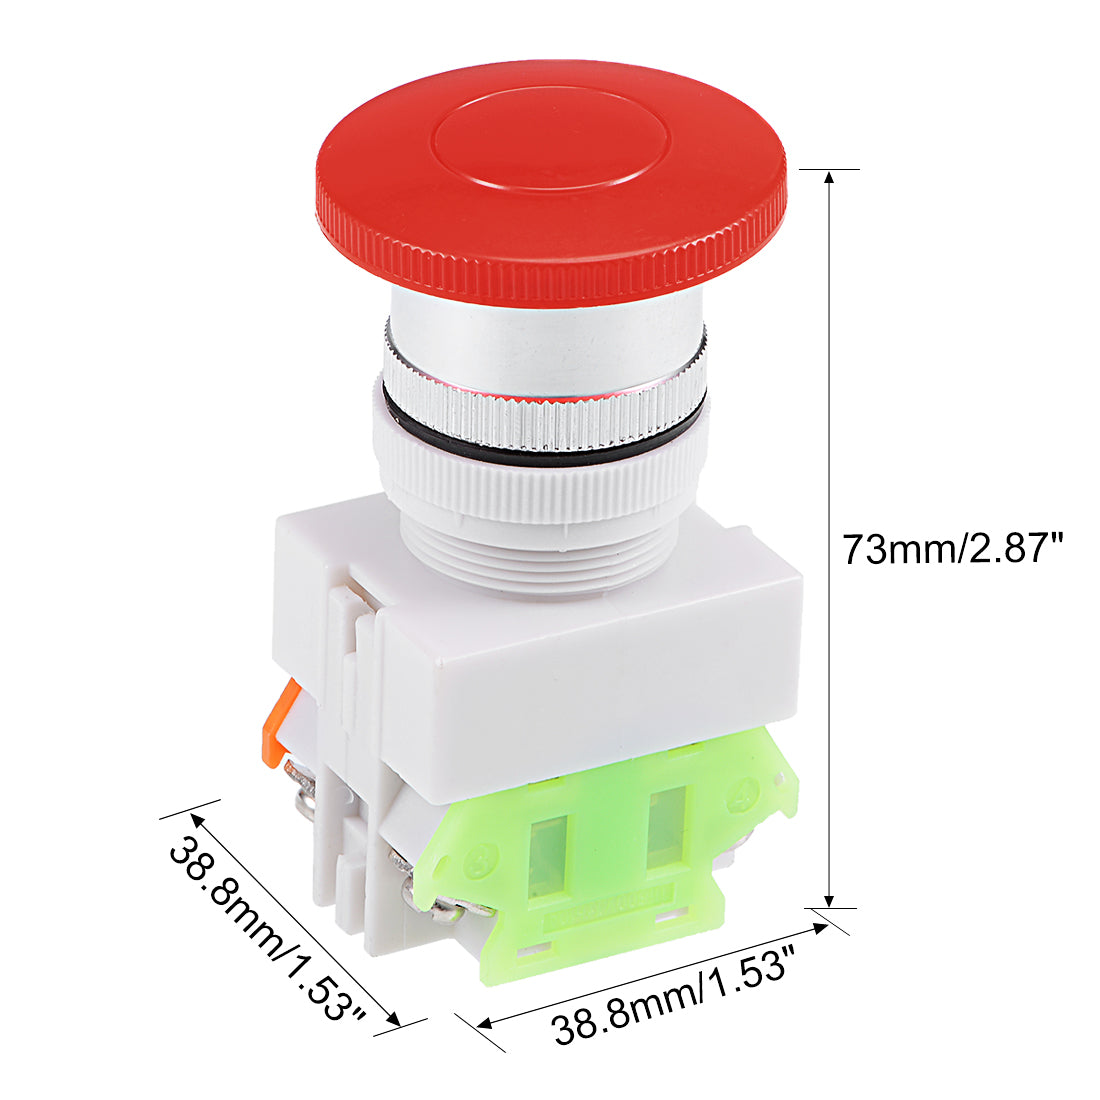 uxcell Uxcell 22mm Mounting Hole Momentary Push Button Switch Plastic Red Round Button DPST 1 NO 1 NC